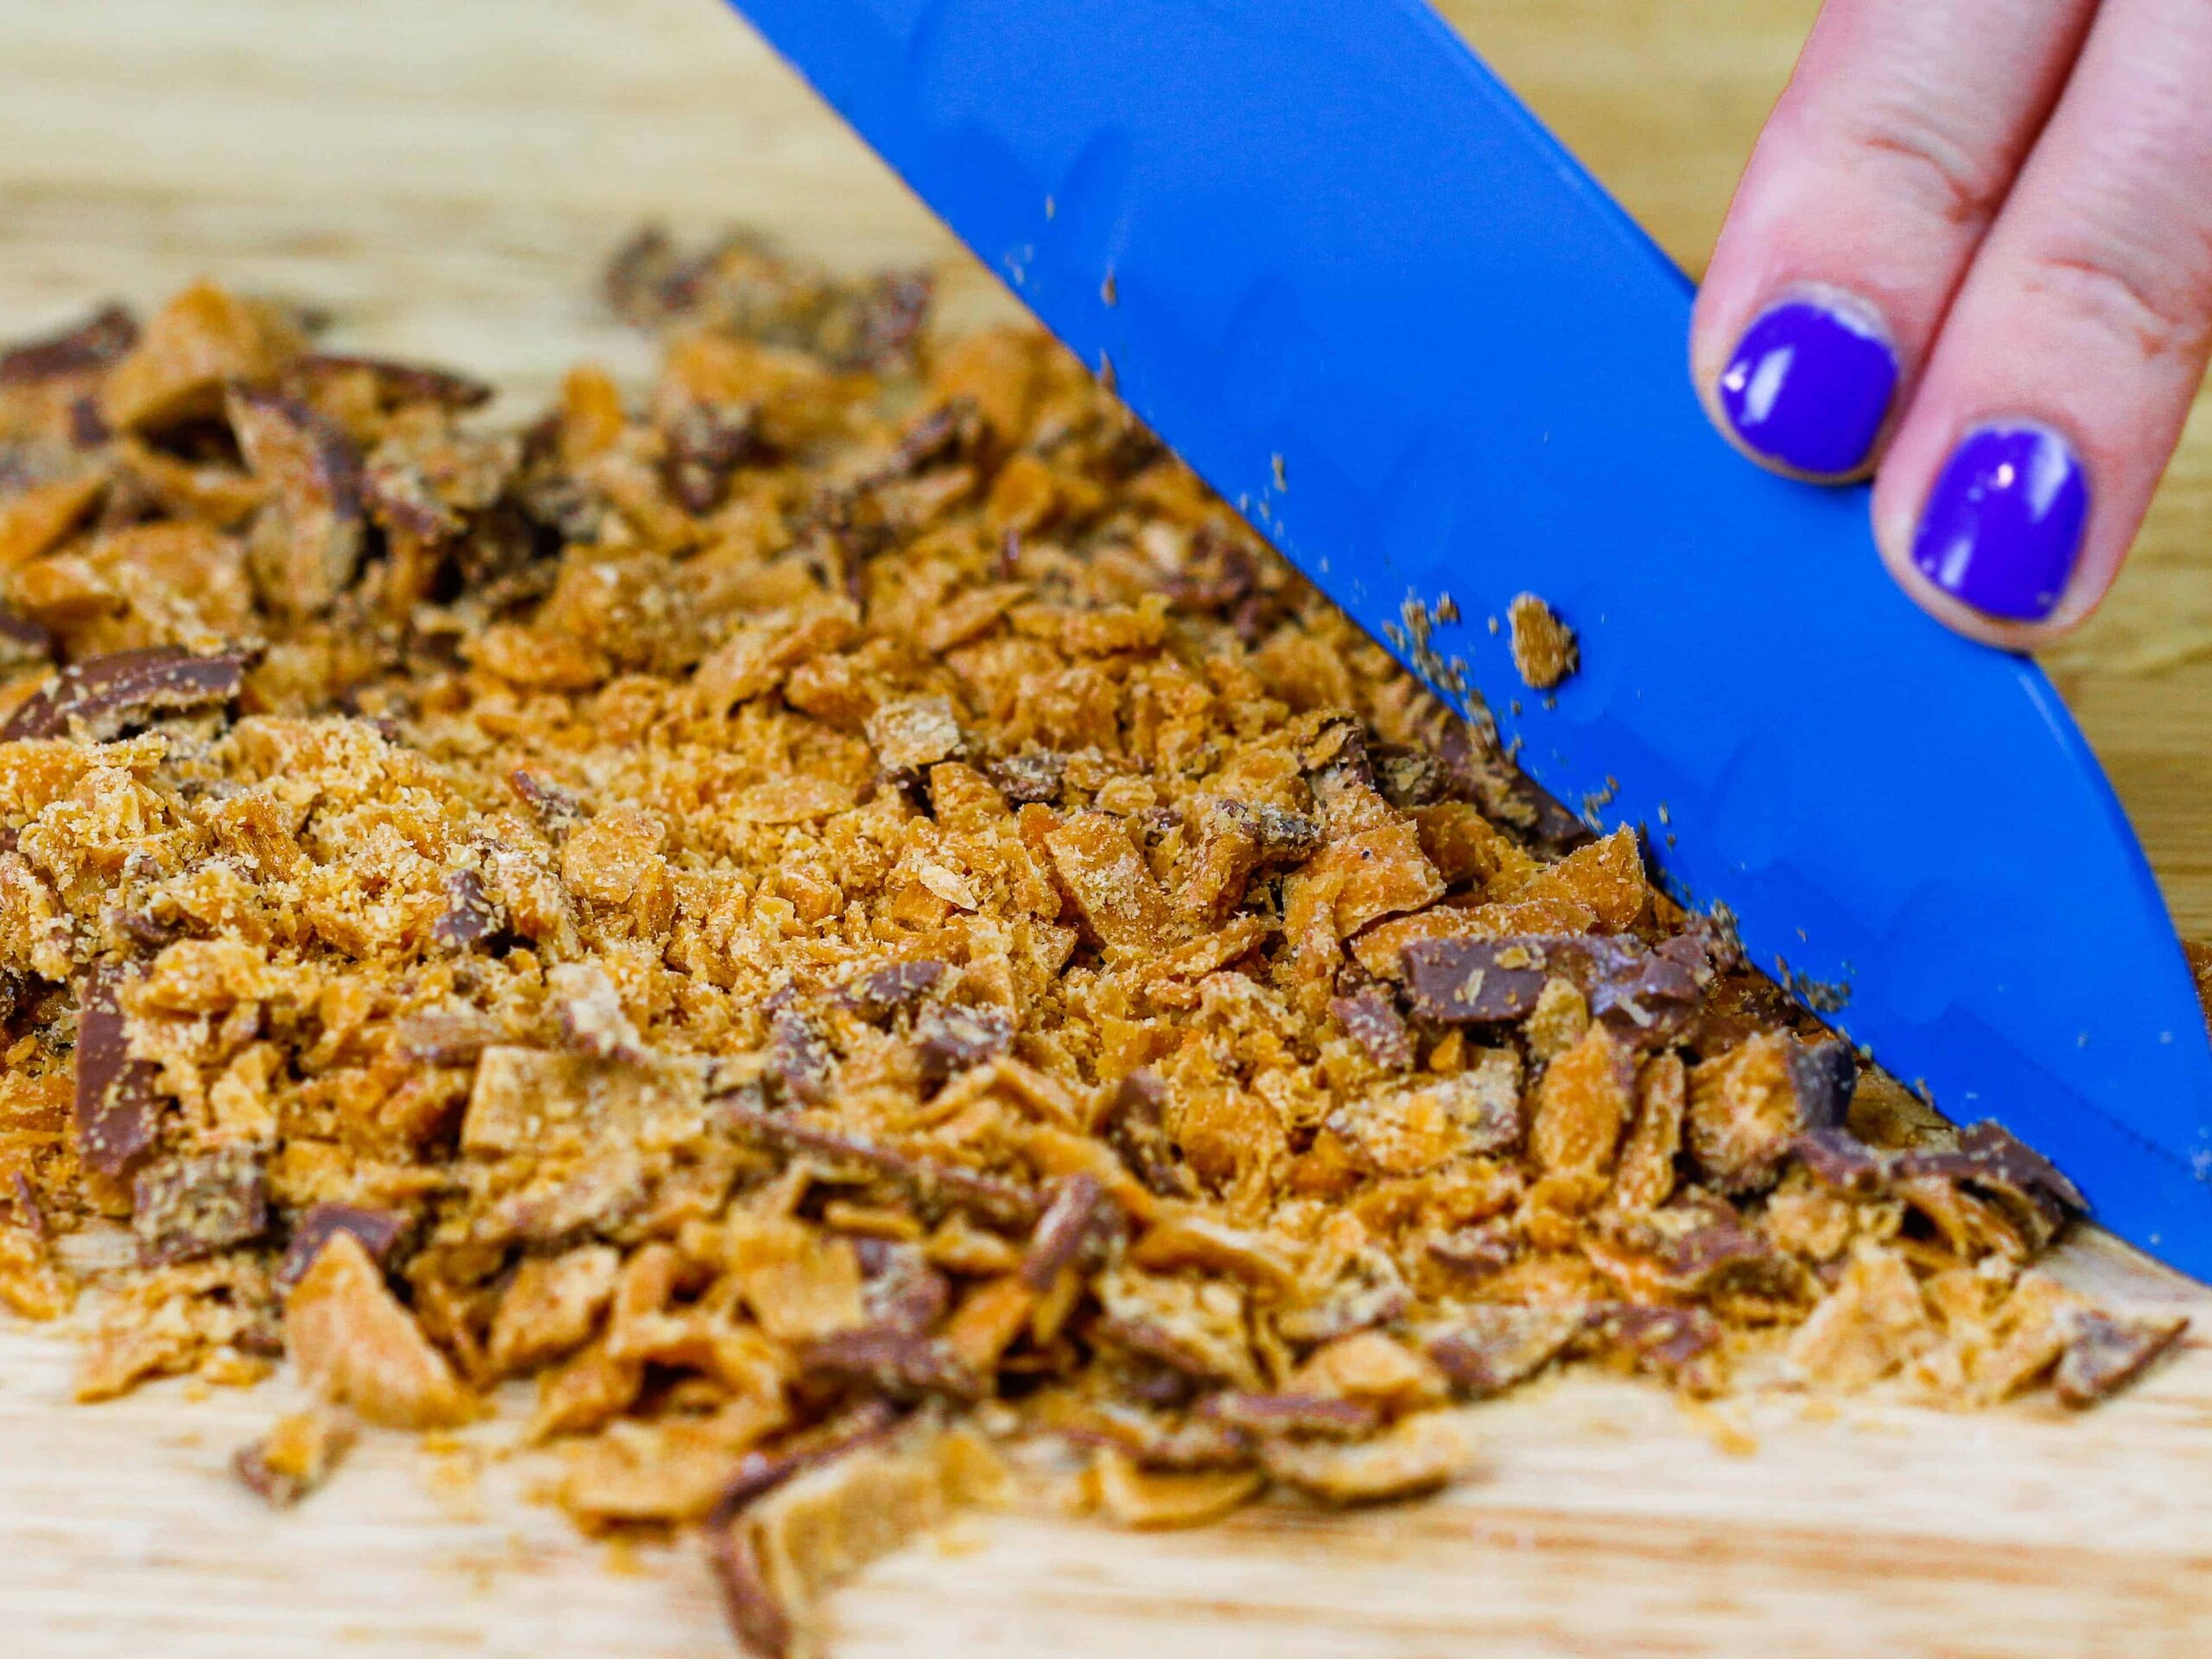 image of a butterfinger bar being chopped up